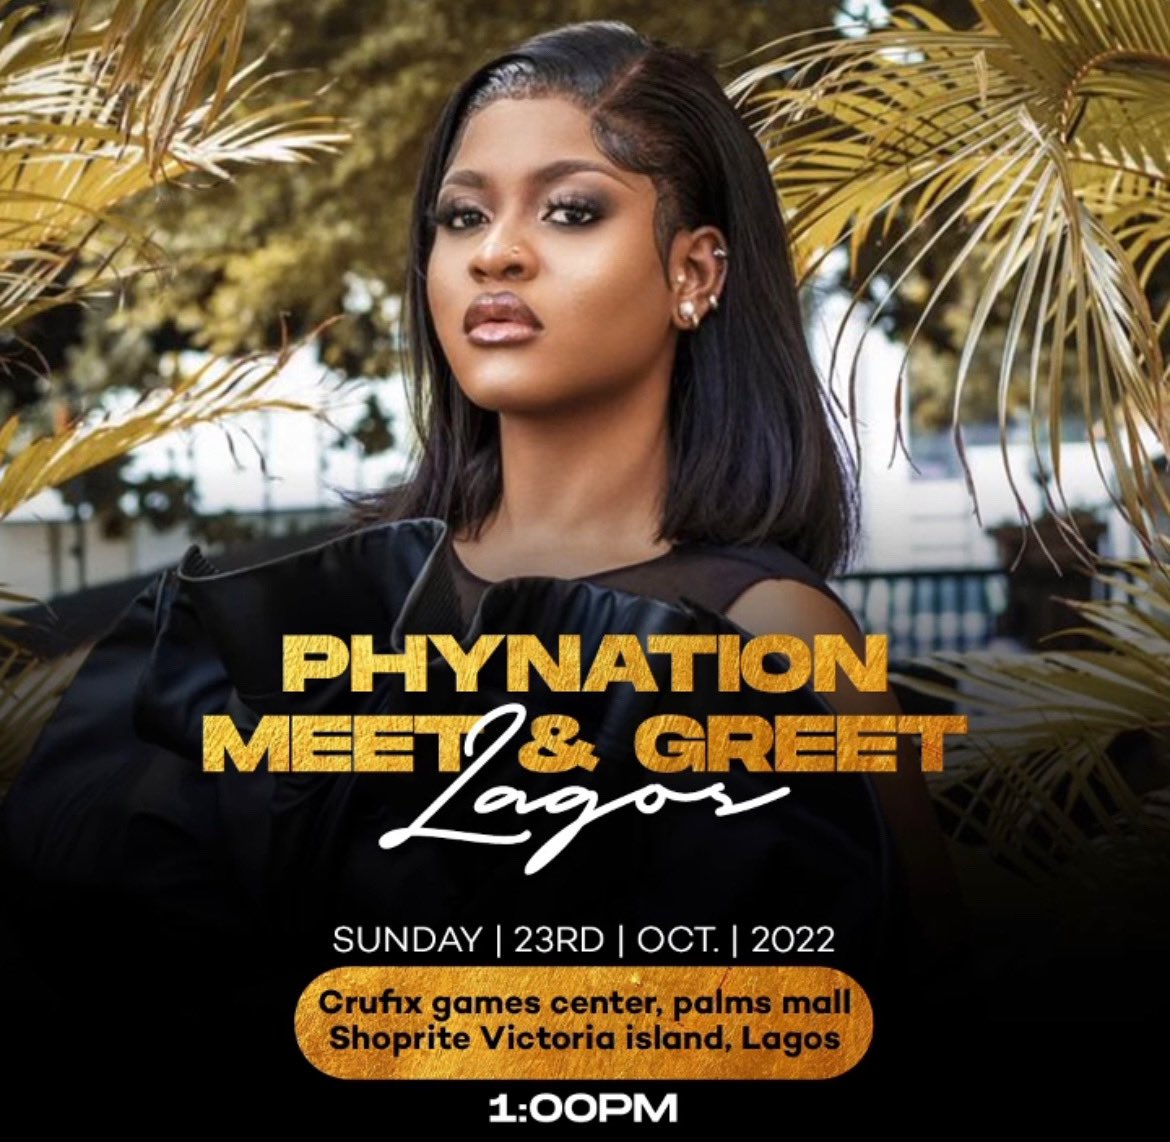 Phynations!! the hype priestess of Nigeria @unusualphyna will be at the The Palms today by 1PM!! Join us @crusifixgames all day for an exciting meet/greet with the Big Brother Naija season 7 winner

#thepalms #bbnaija #bbnaijaseason7 #weekendvibes #lekkibabes #lekkiwives